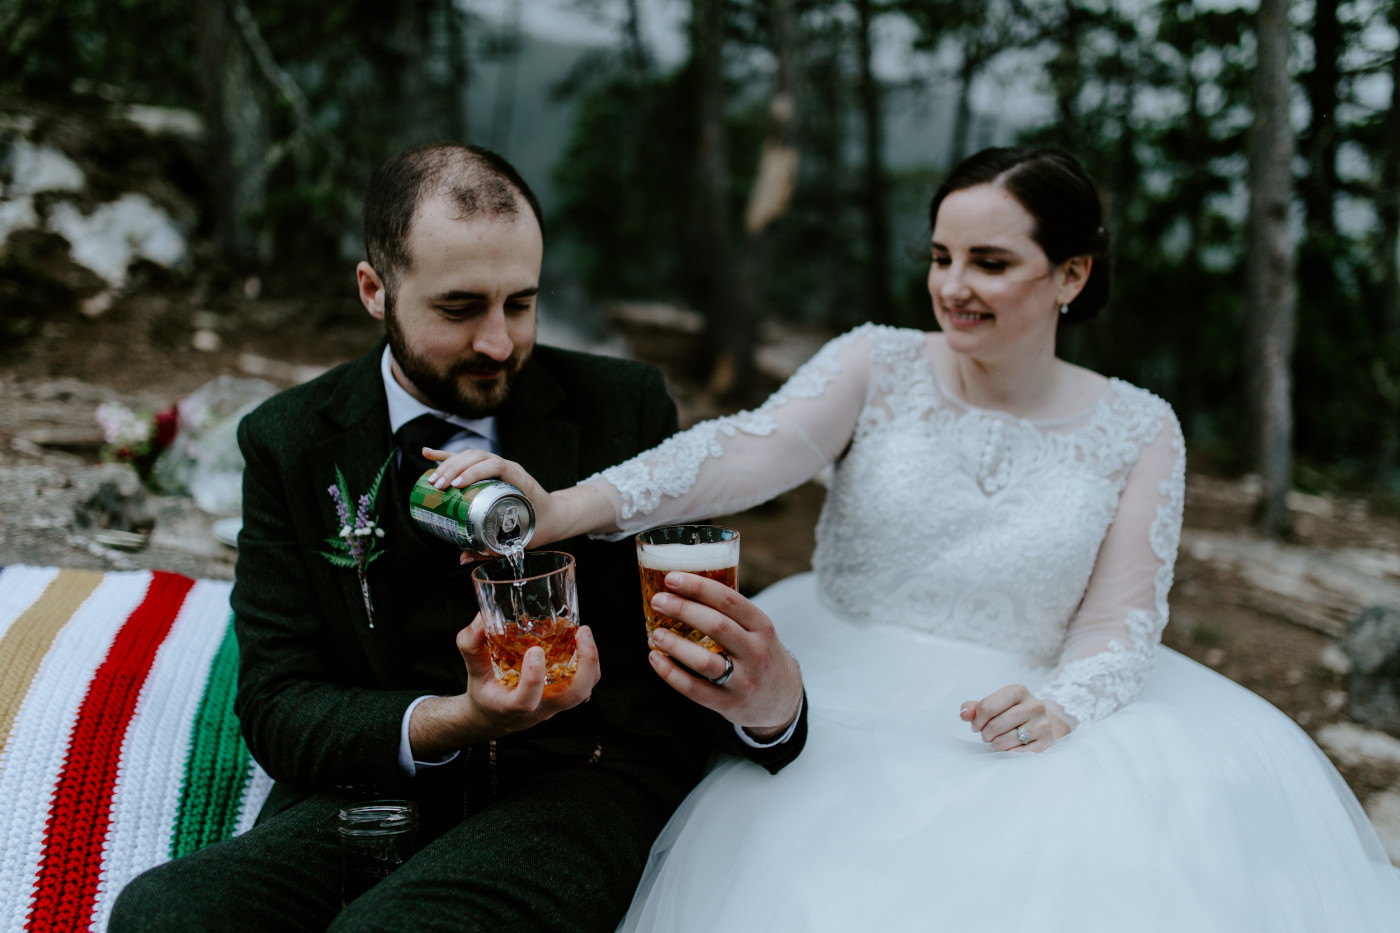 Elizabeth and Alex pouring drinks to celebrate their elopement. Elopement photography at North Cascades National Park by Sienna Plus Josh.